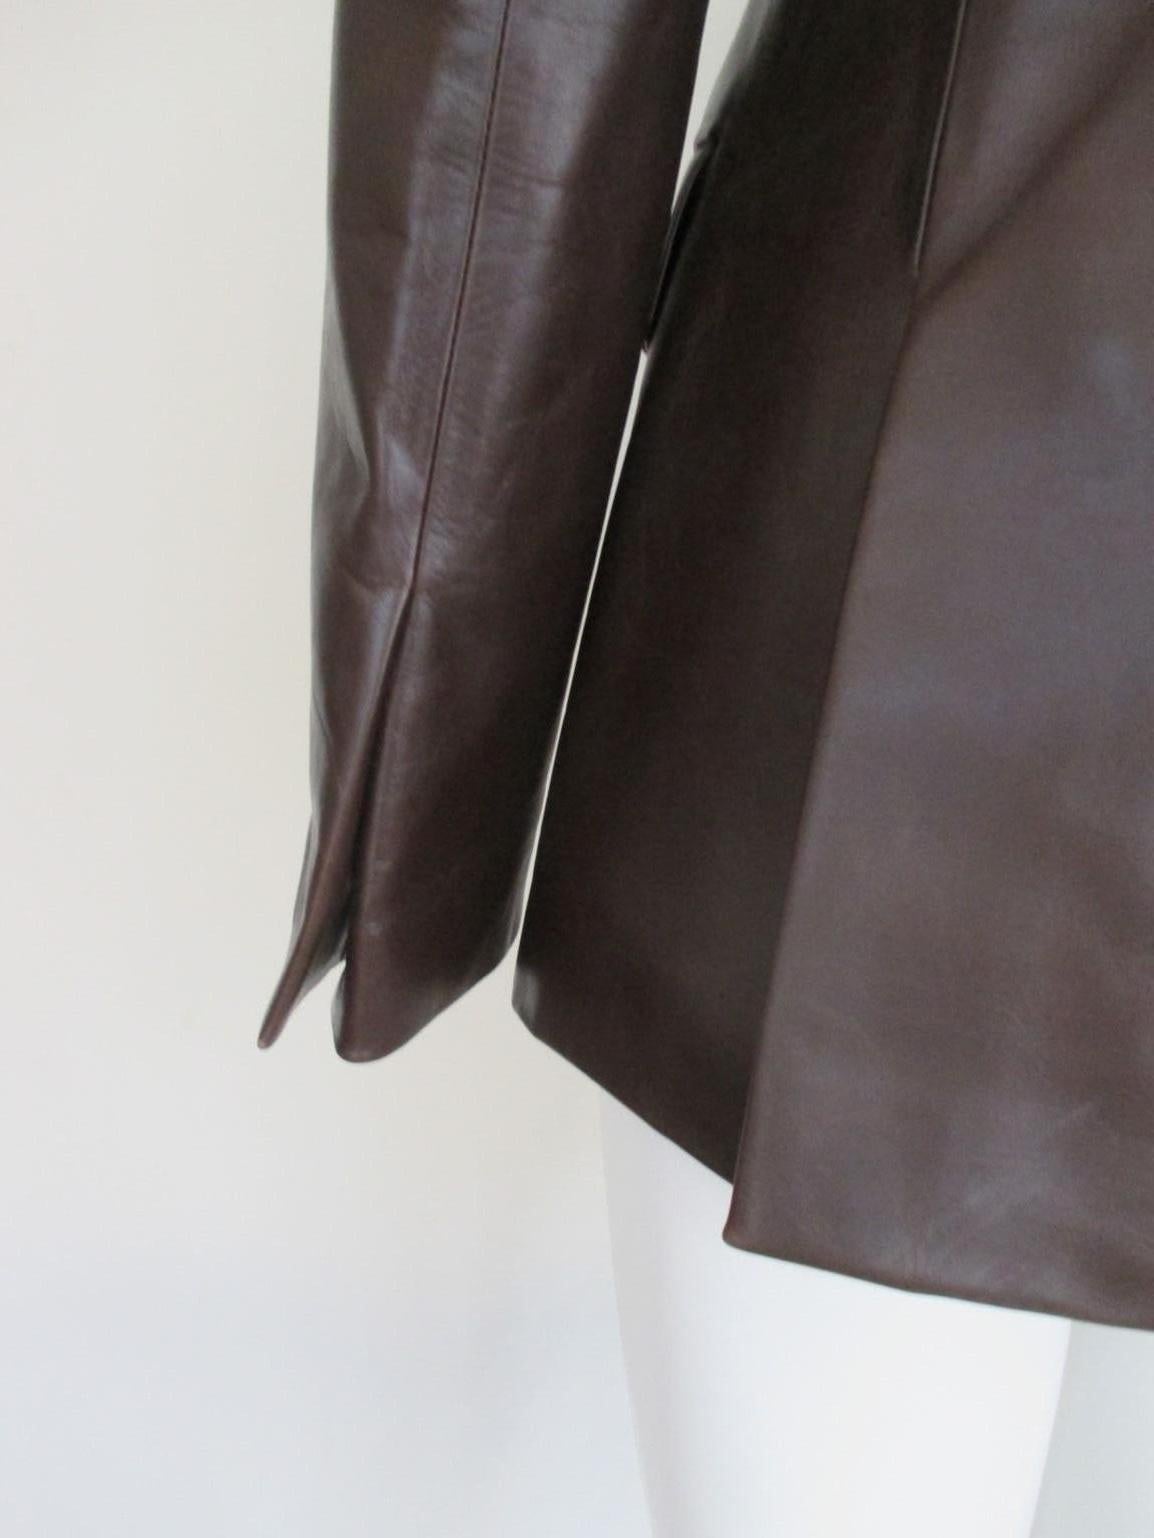 Women's or Men's Gucci Brown Leather Jacket